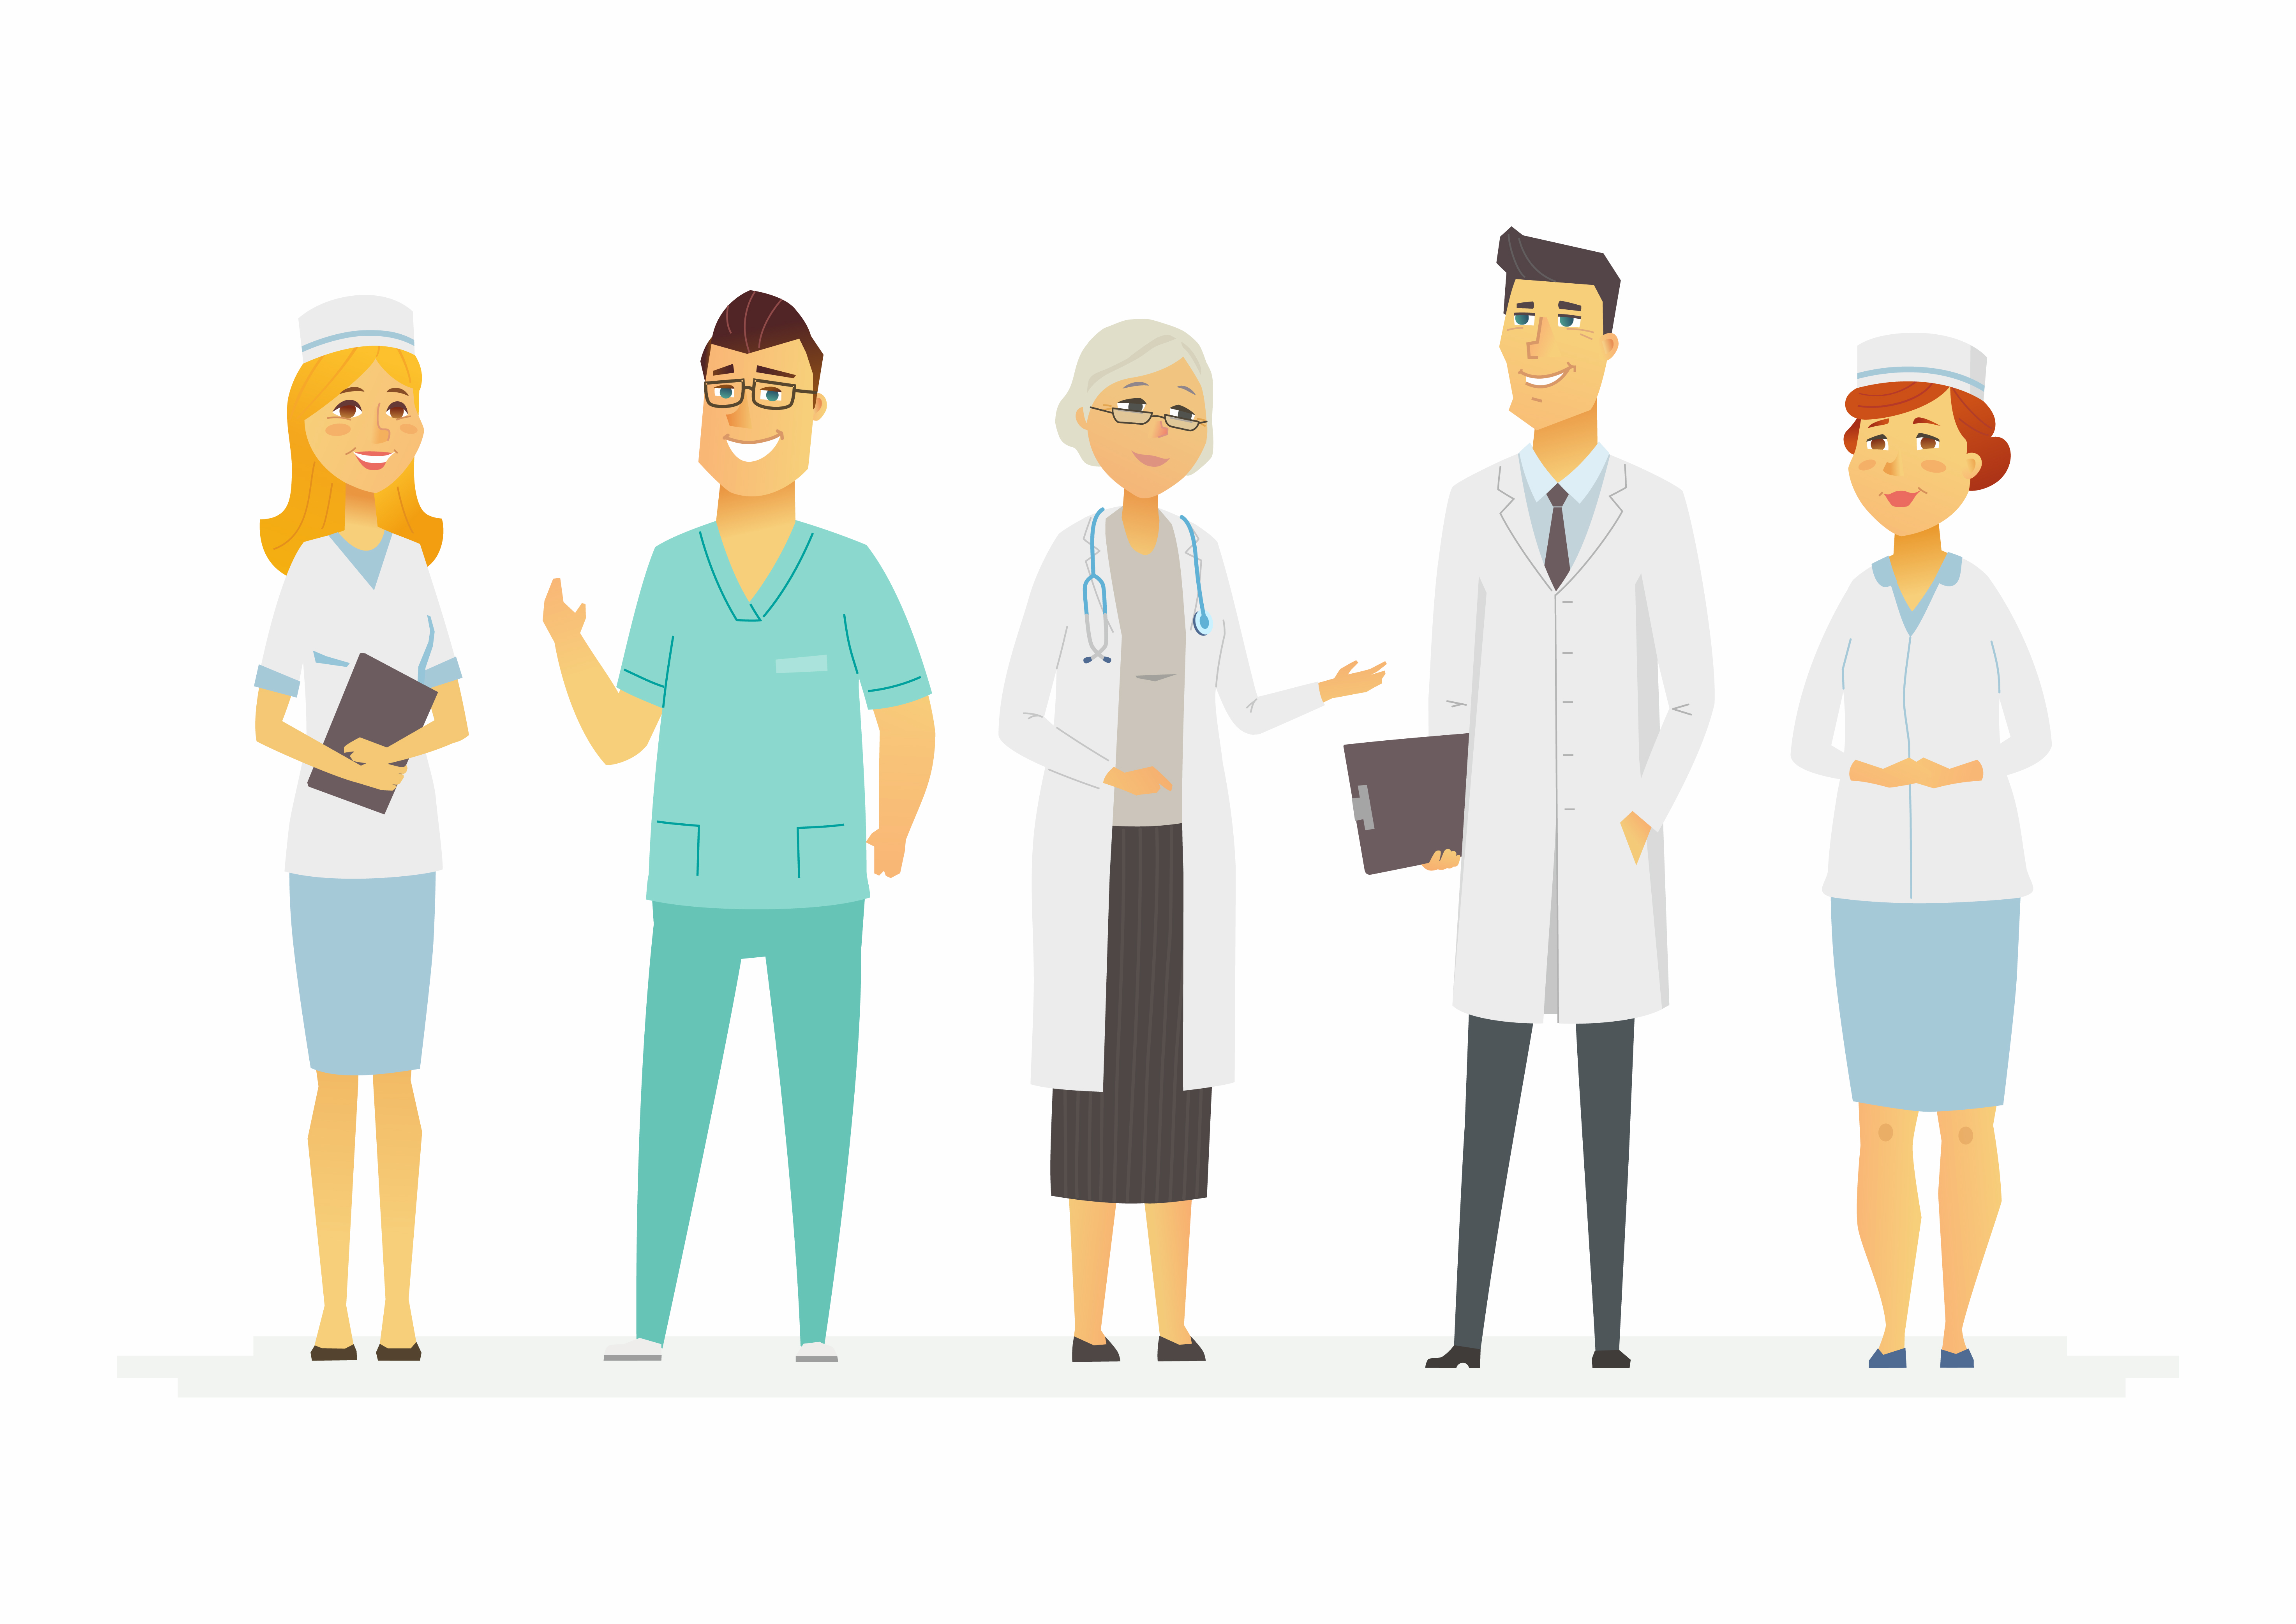 Doctors - cartoon people characters isolated illustration